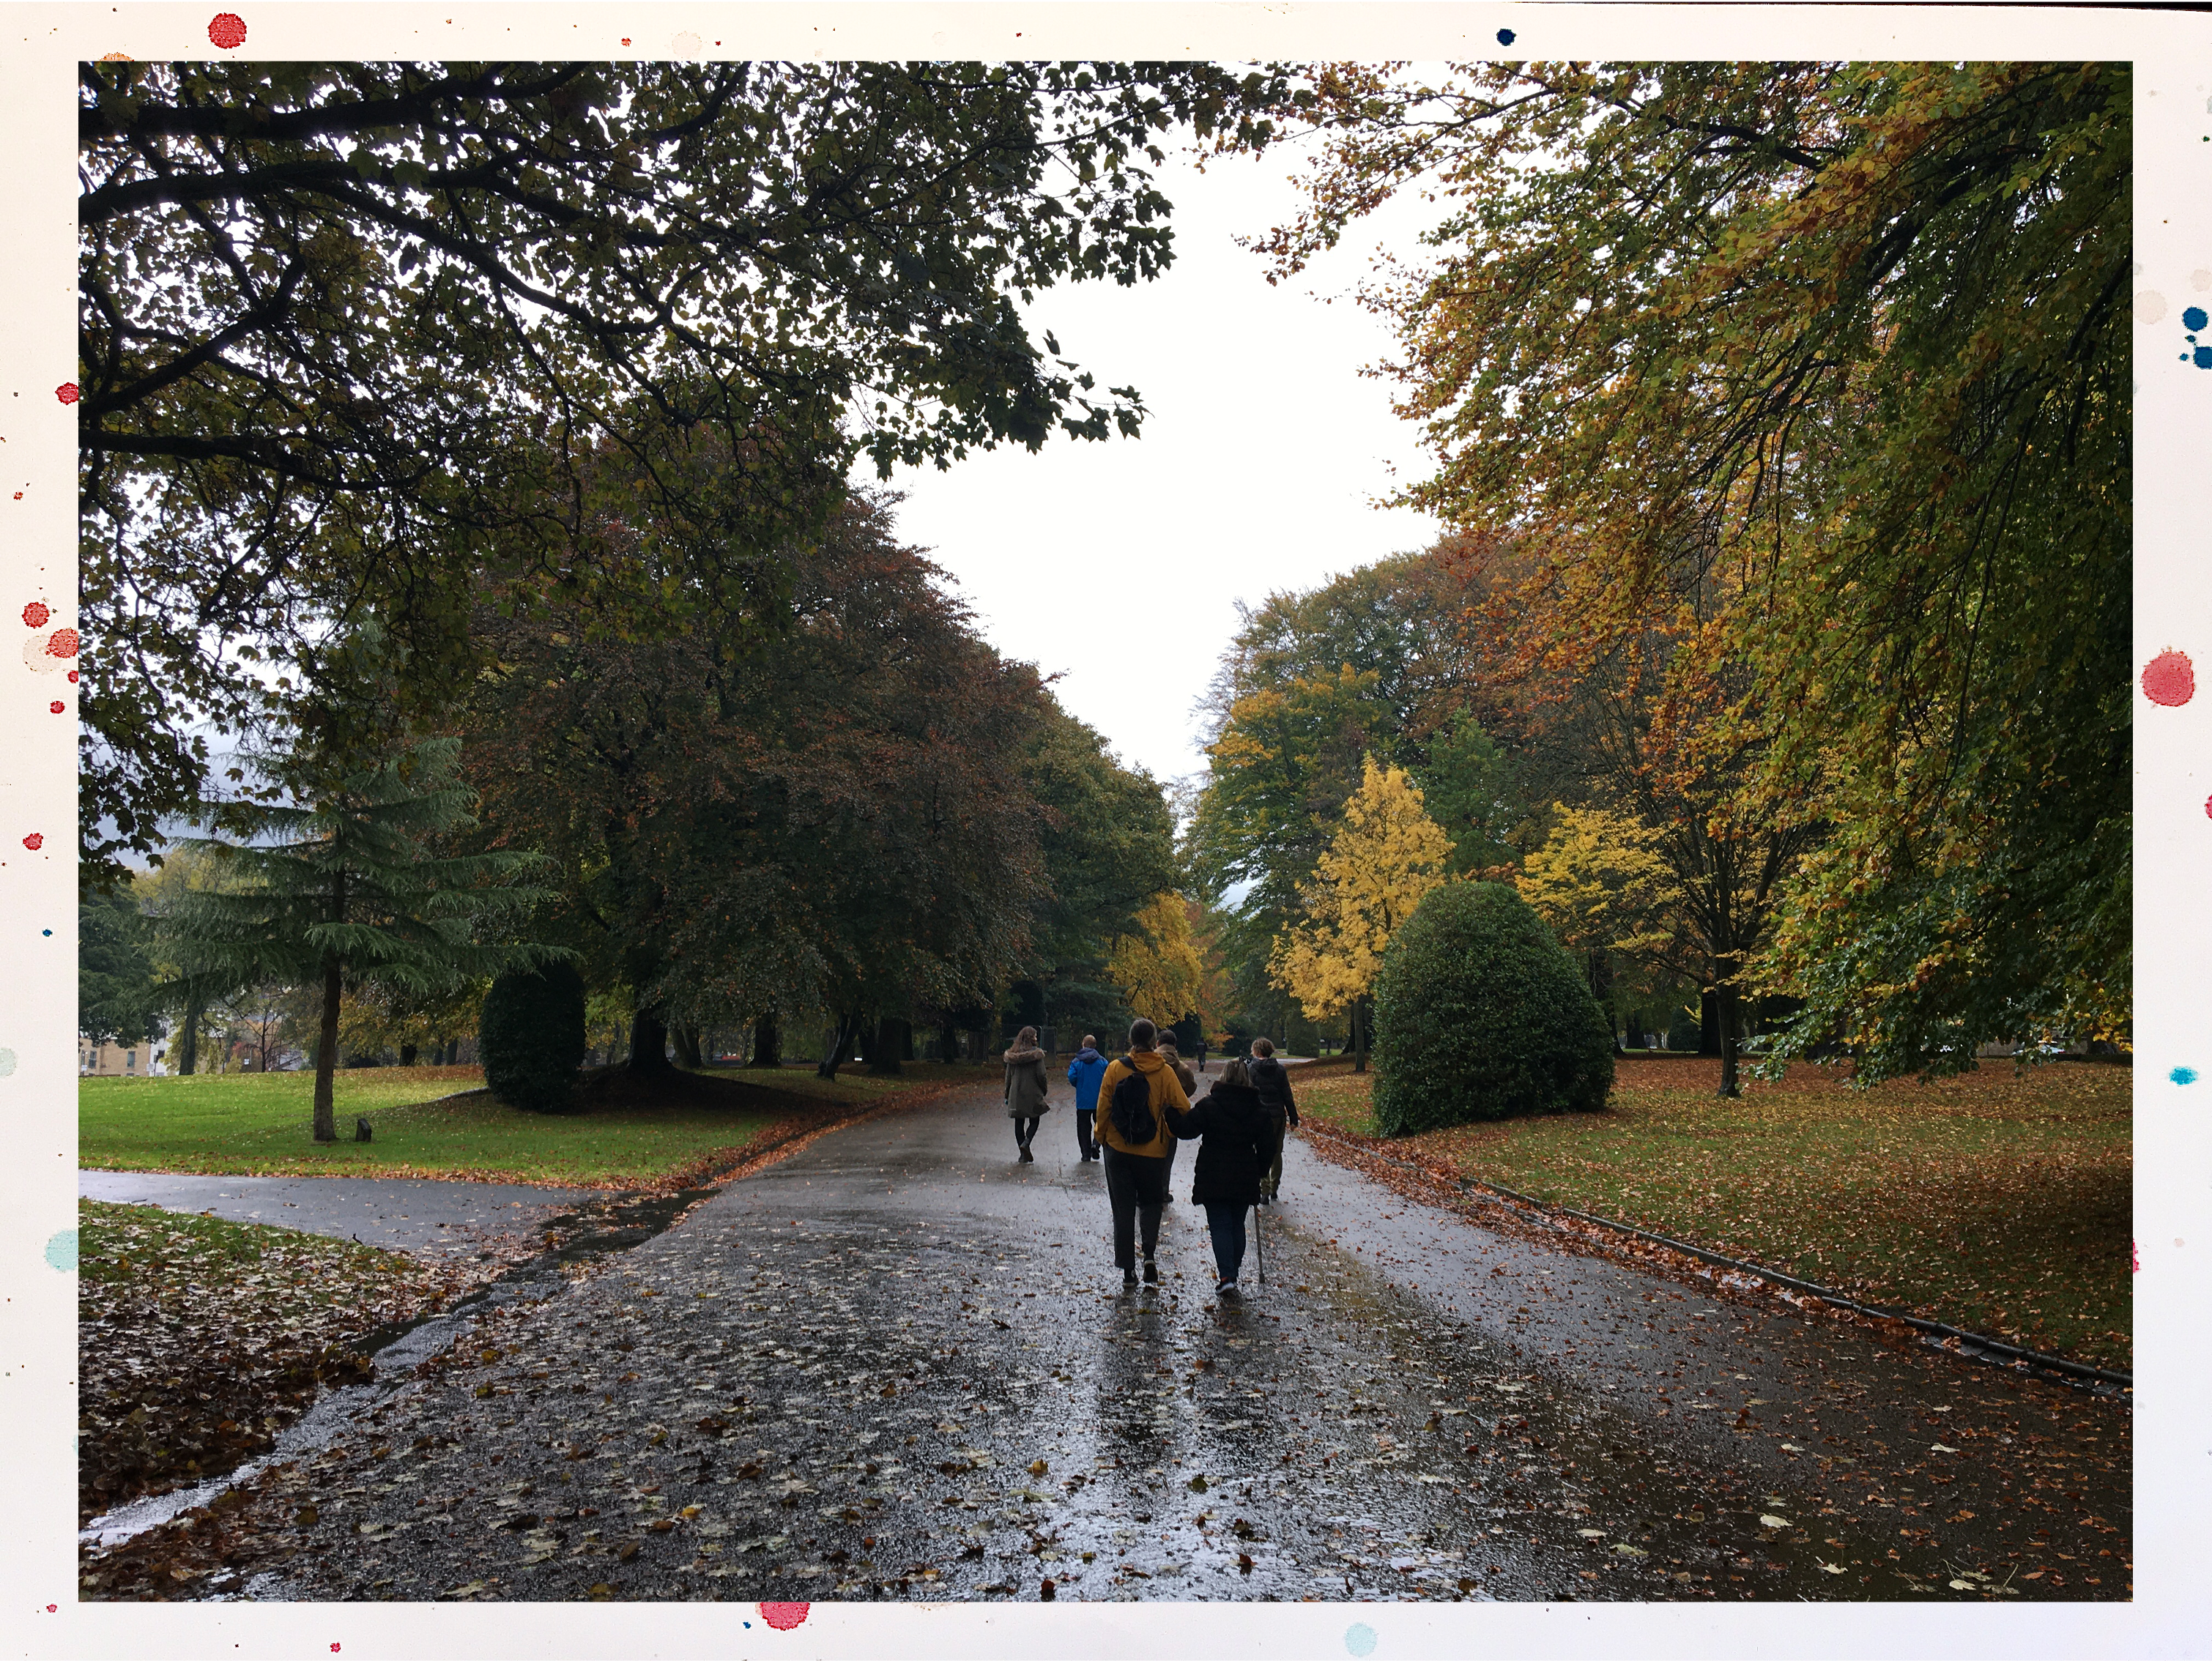 The To Wander group are walking along a path through green and yellow trees. The path is wet and there are leaves on the floor.